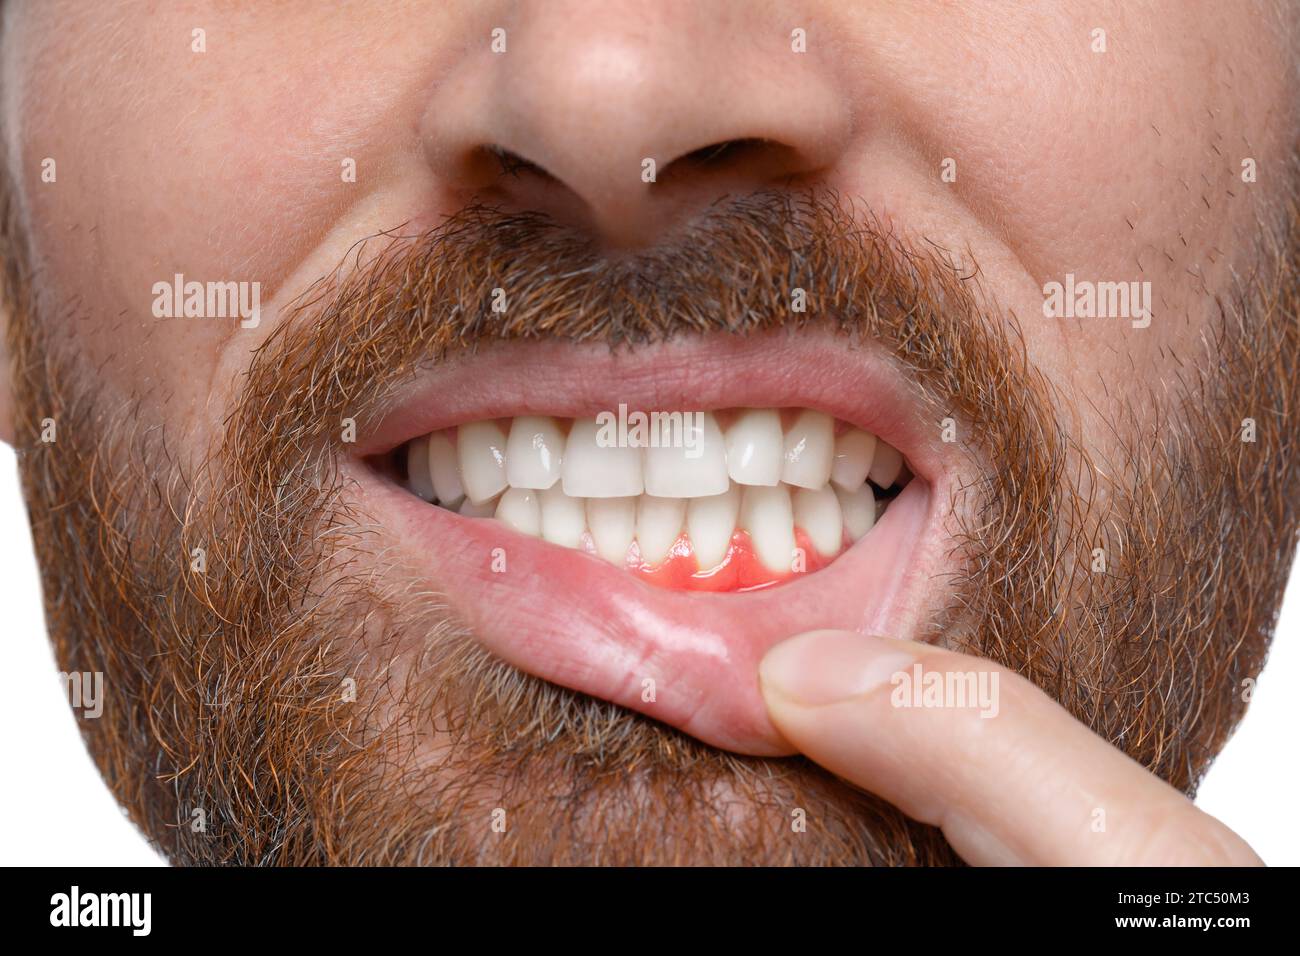 Man showing inflamed gum, closeup. Oral cavity health Stock Photo